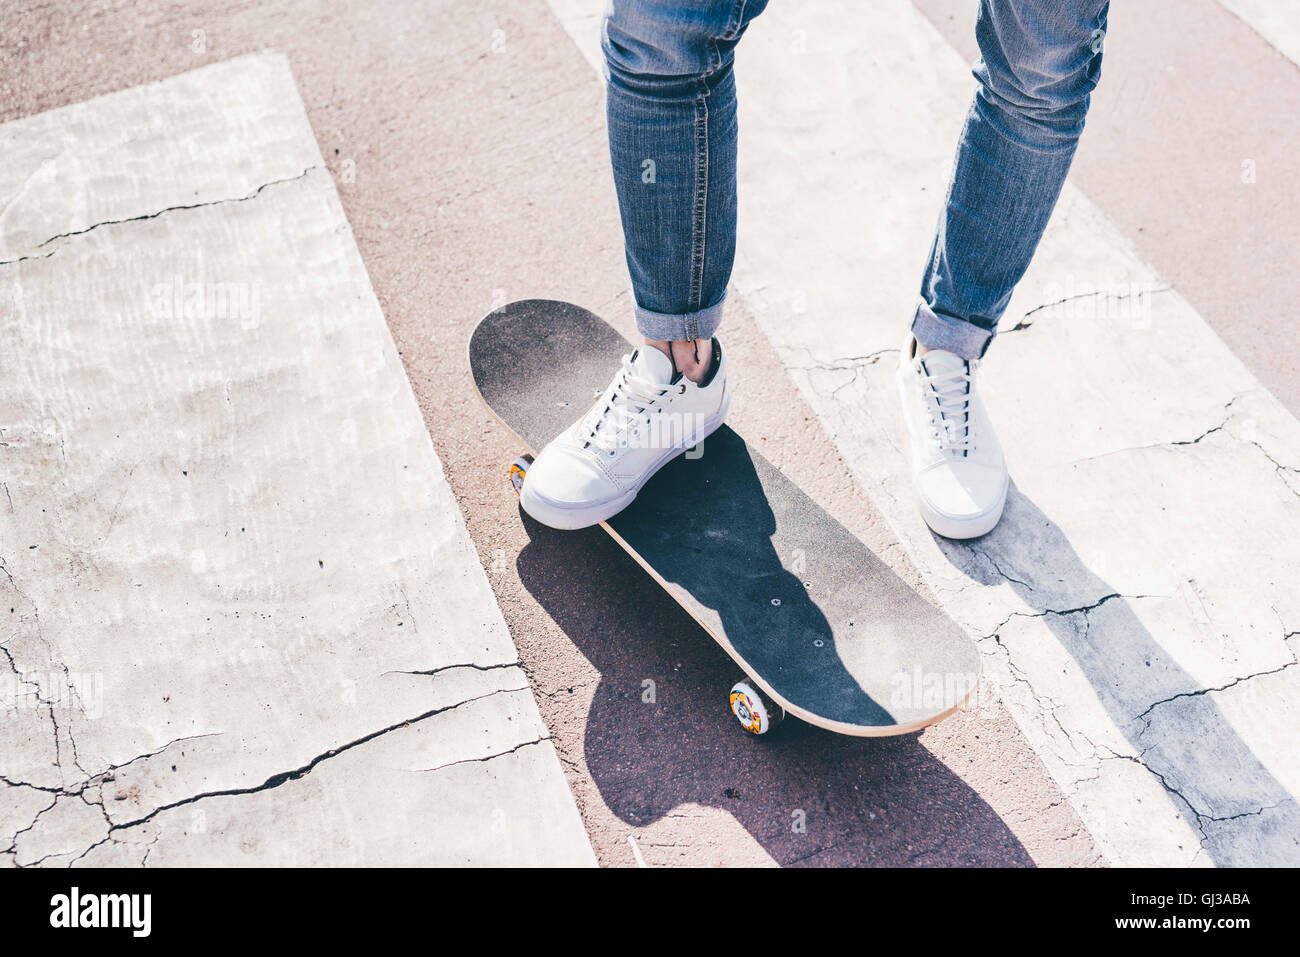 Legs and feet of young male skateboarder on pedestrian crossing Stock Photo